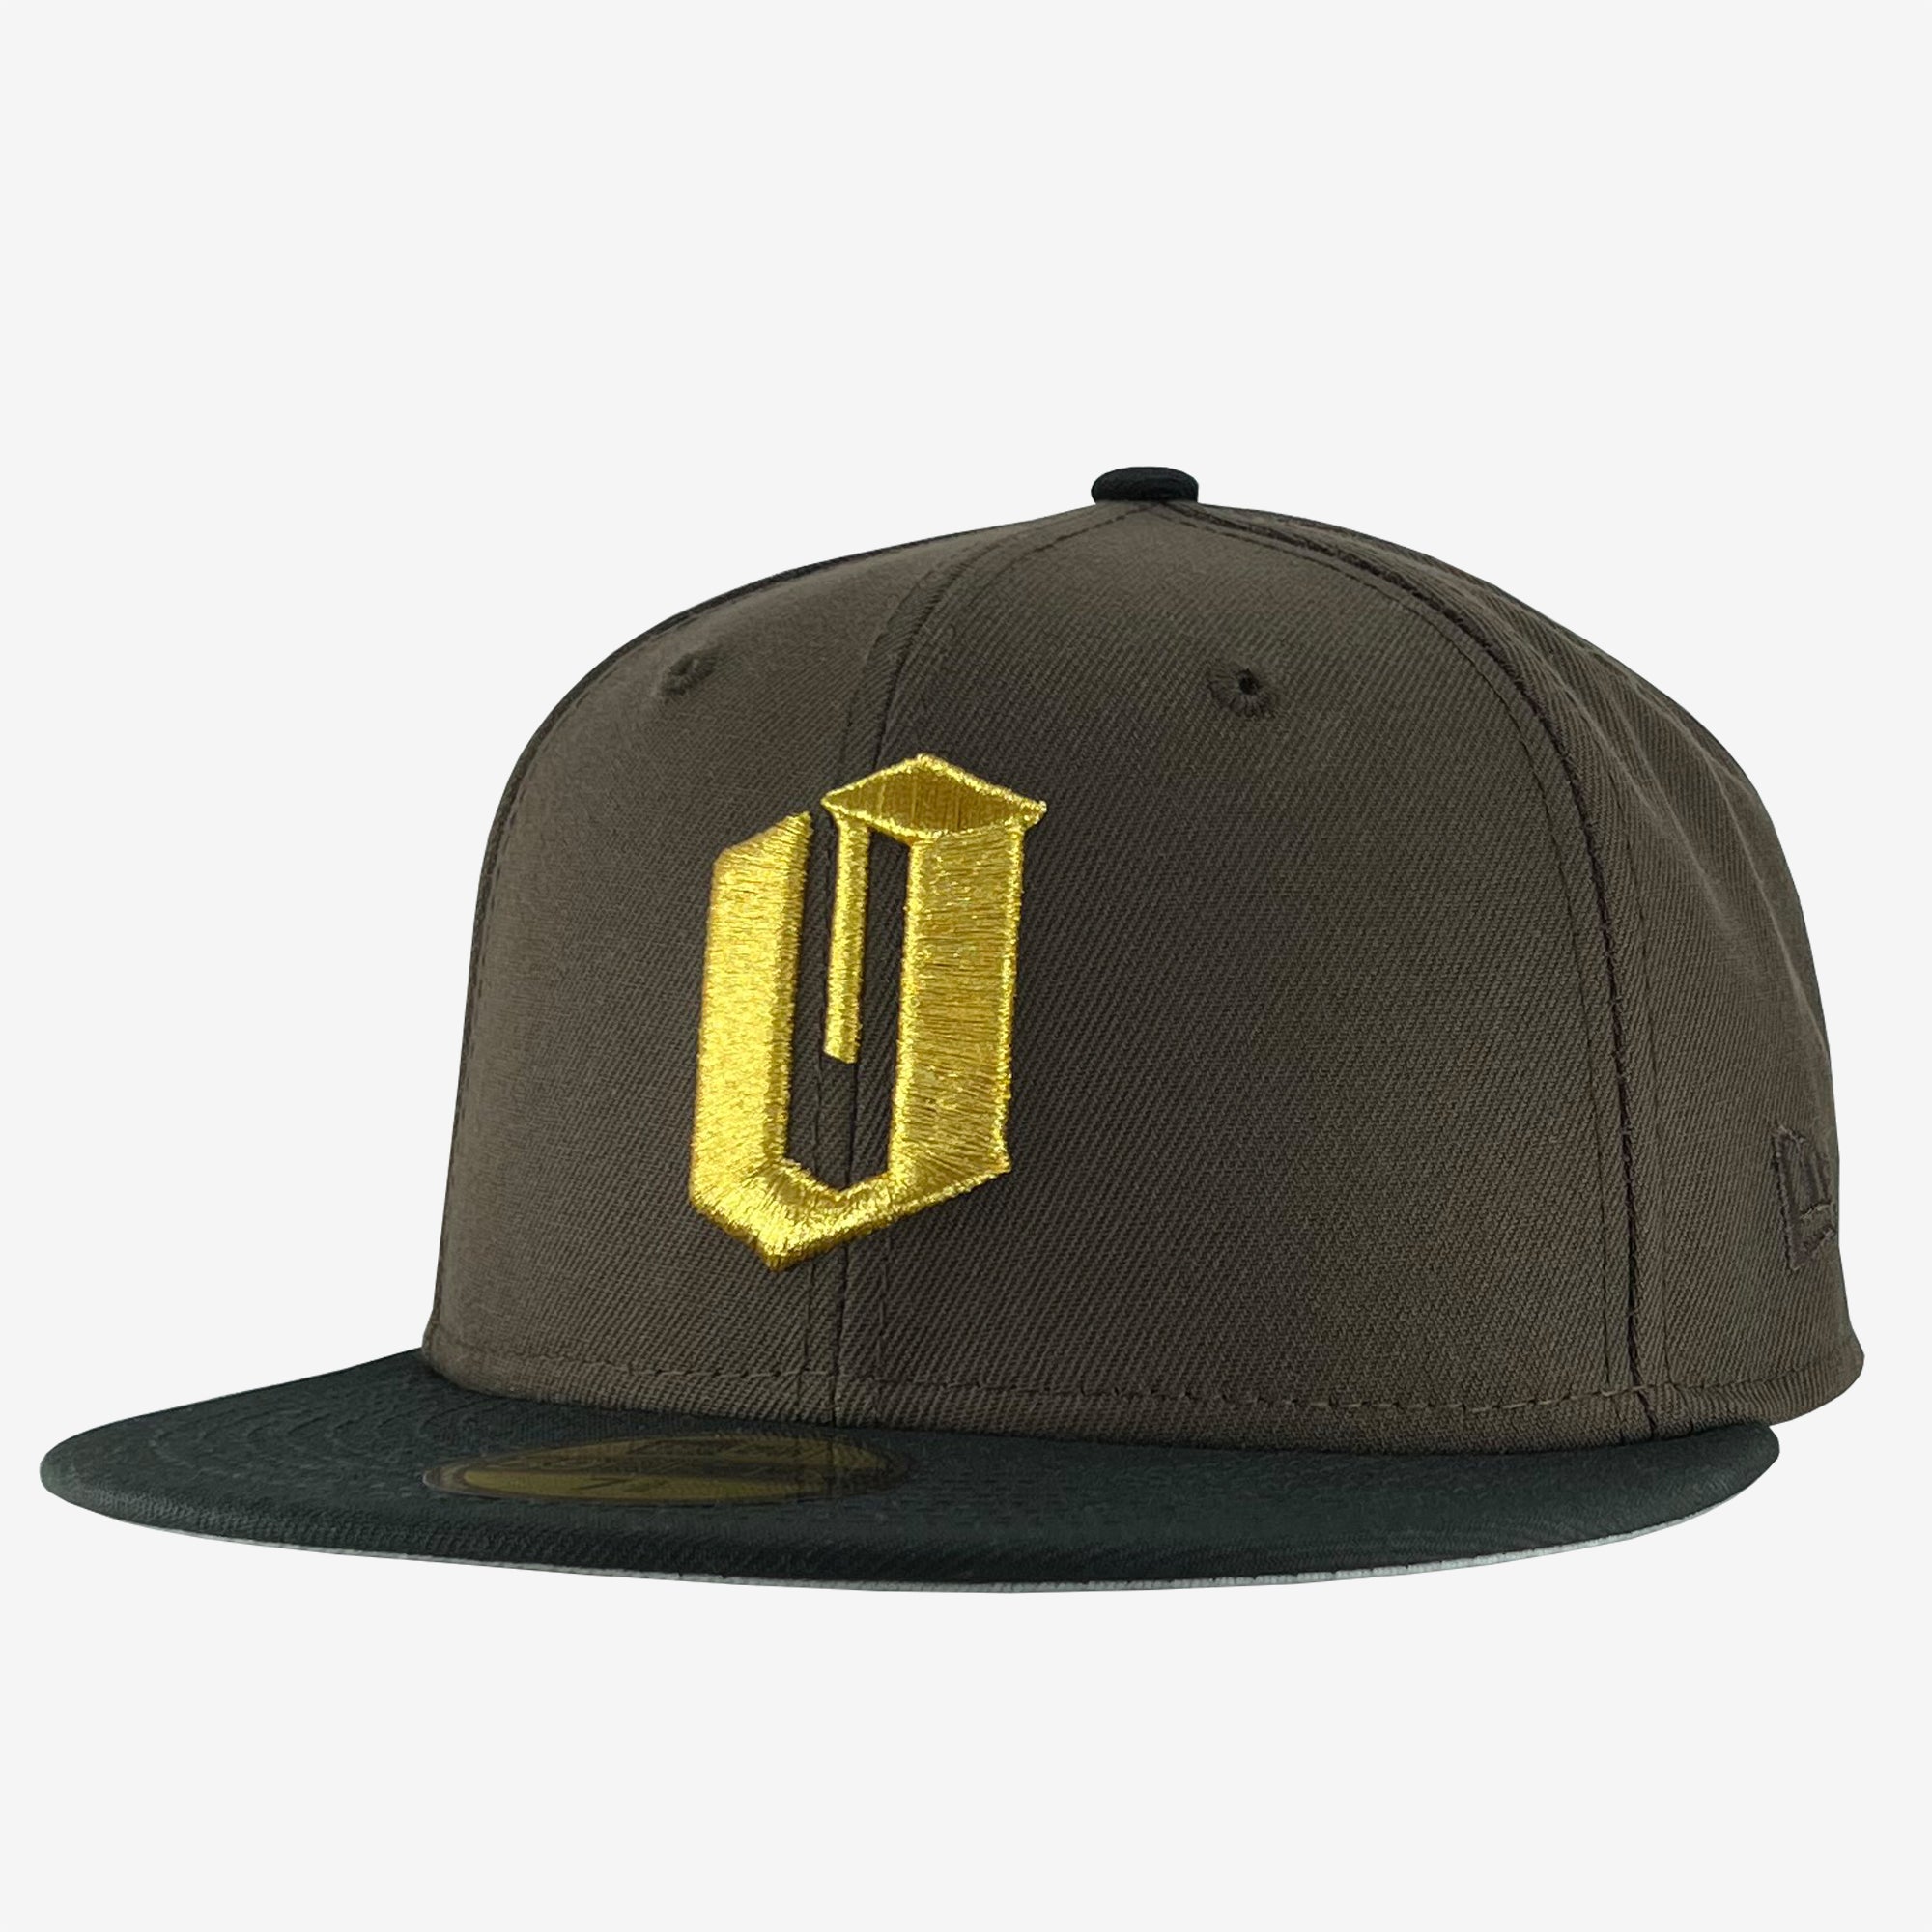 New Era 9FIFTY walnut brown cap with gold embroidered O for Oakland & black bill. Tilted to show New Era logo on left wear side.